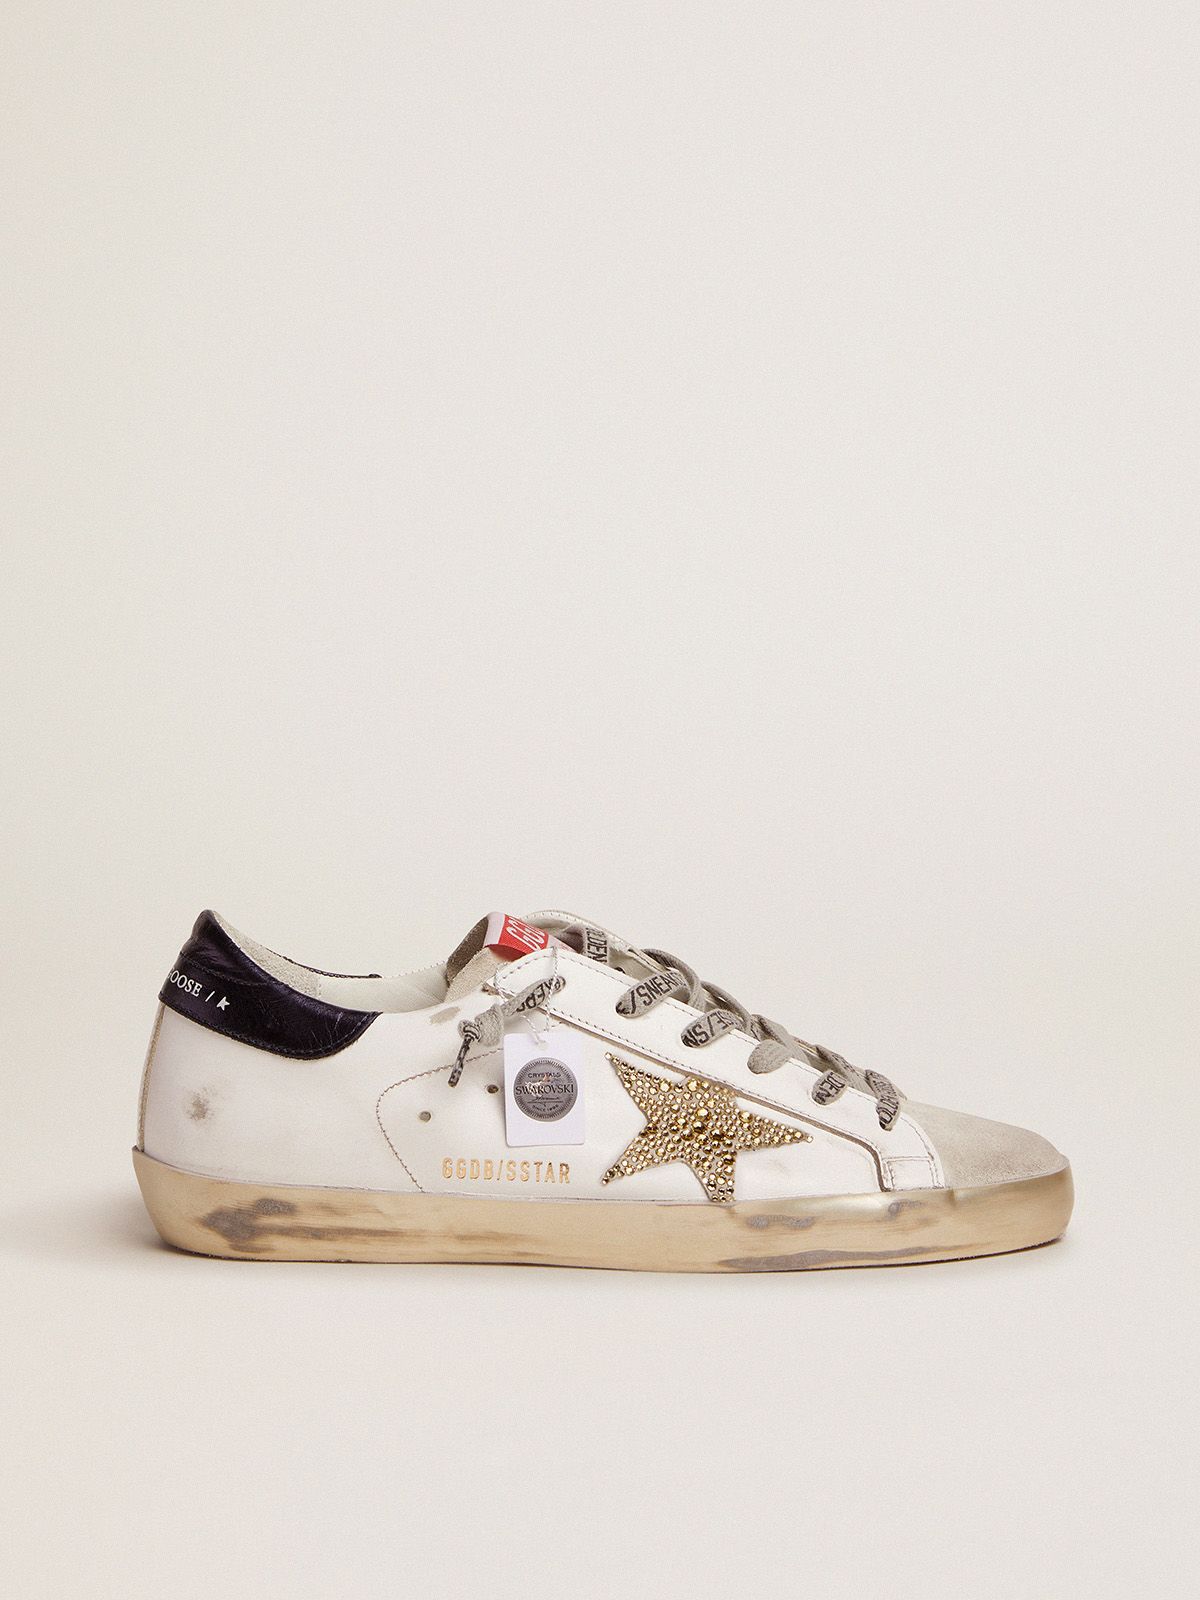 Sneakers Uomo Golden Goose Super-Star LTD sneakers with navy-blue laminated leather heel tab and Swarovski crystal star